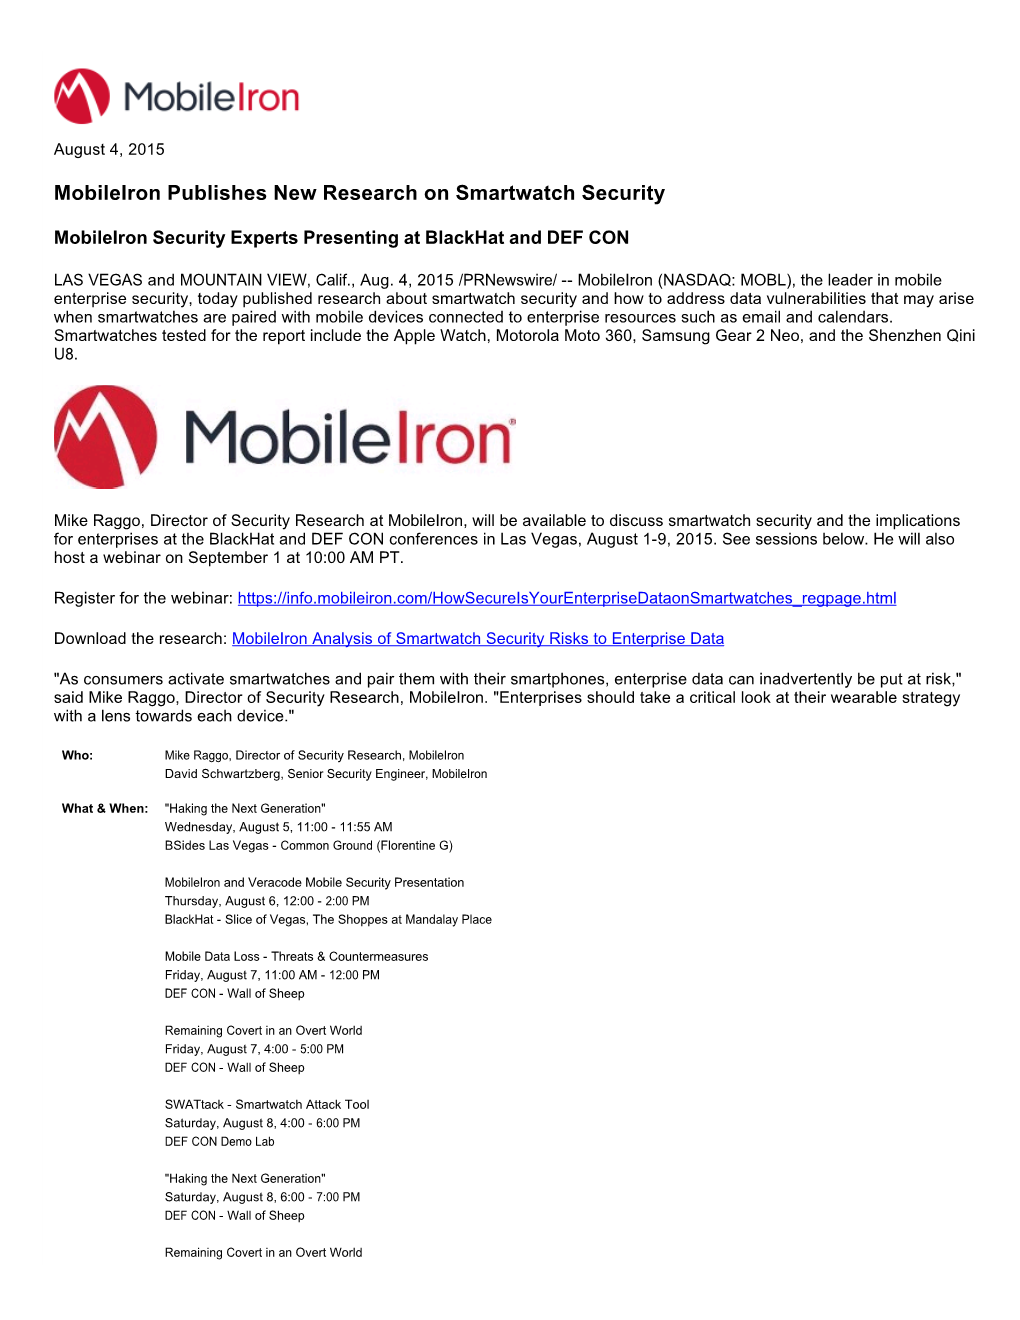 Mobileiron Publishes New Research on Smartwatch Security